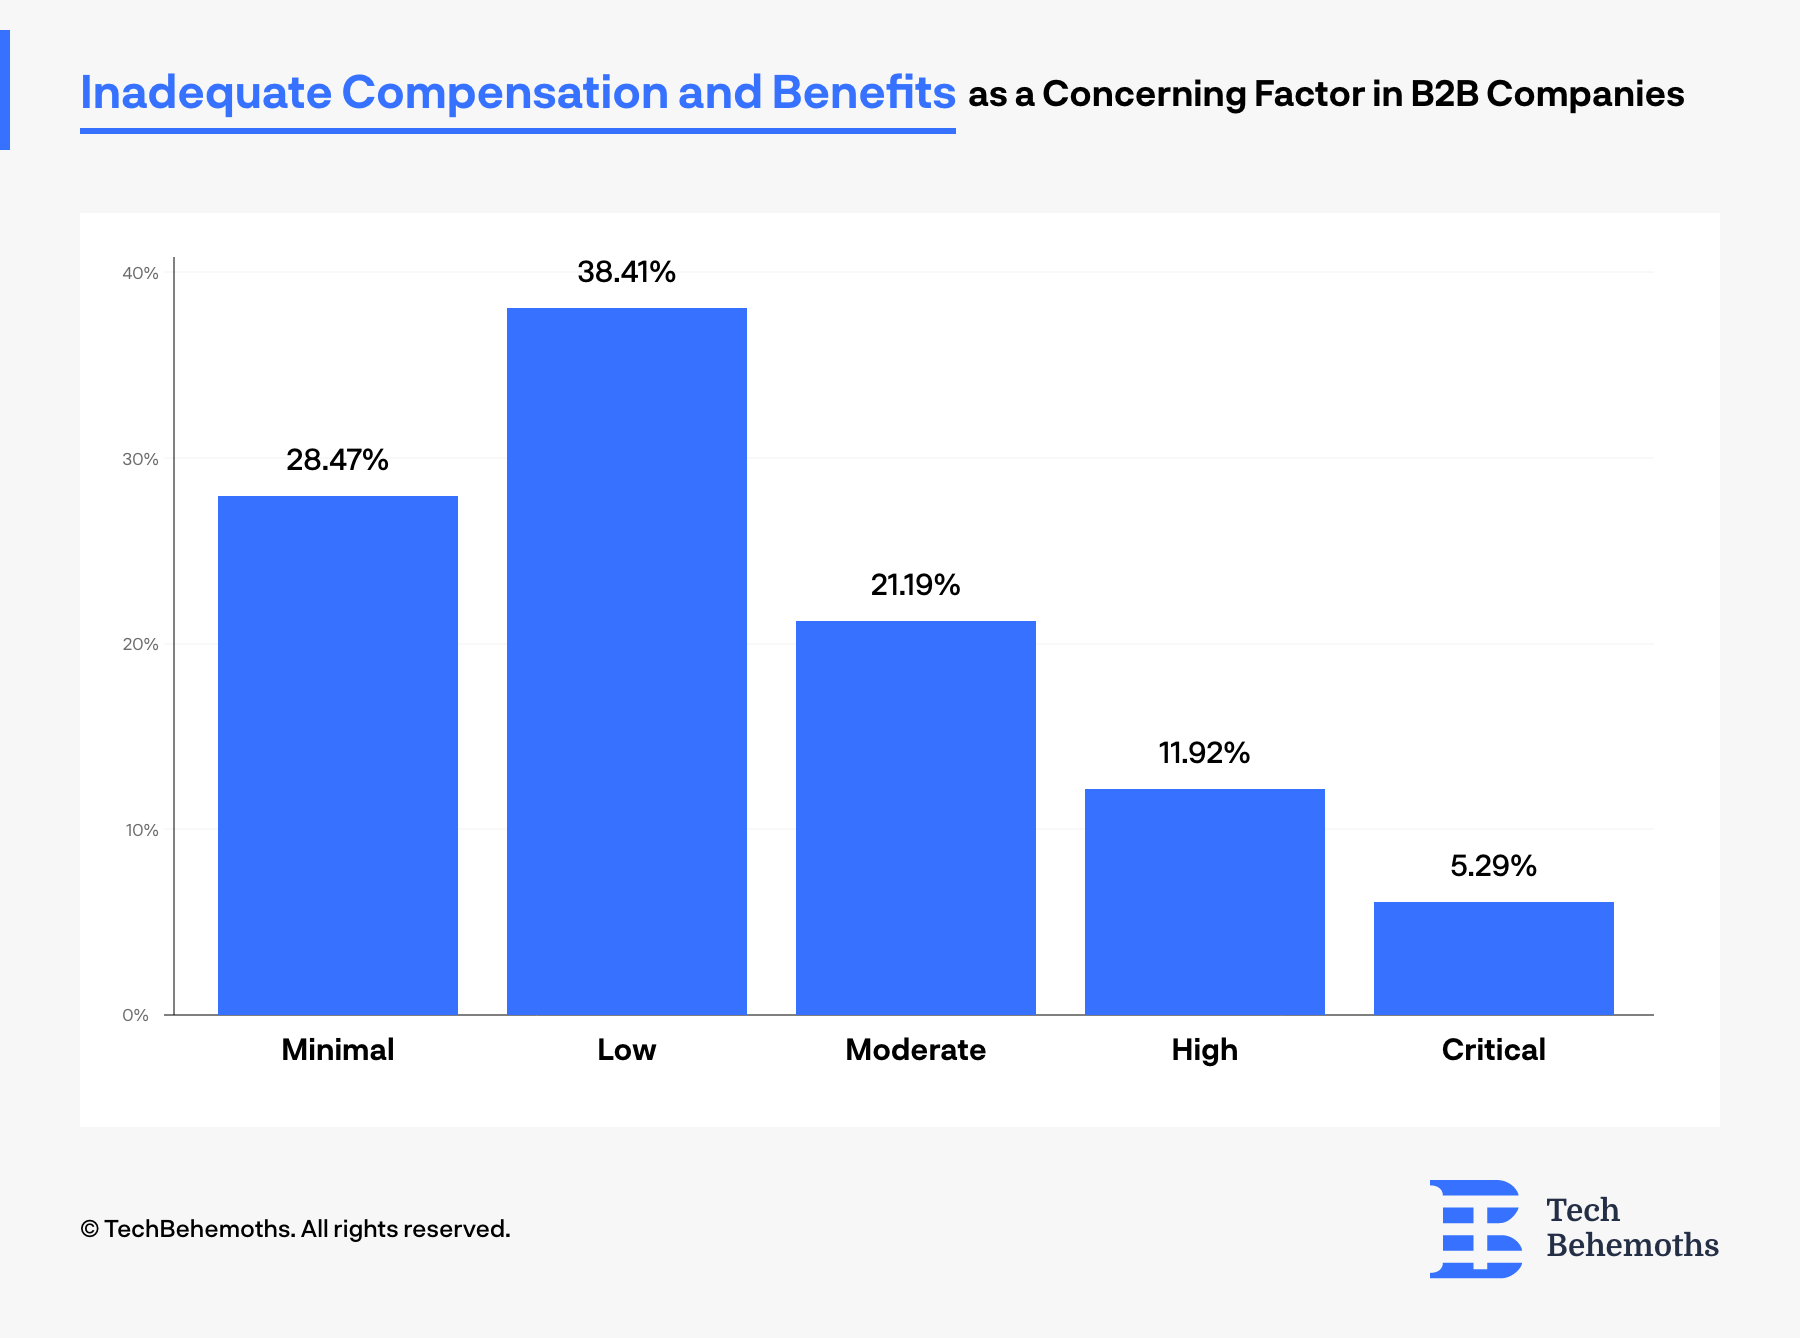 21.19% of employees think that inadequate or low compensations are a moderate factor of concern with their current company